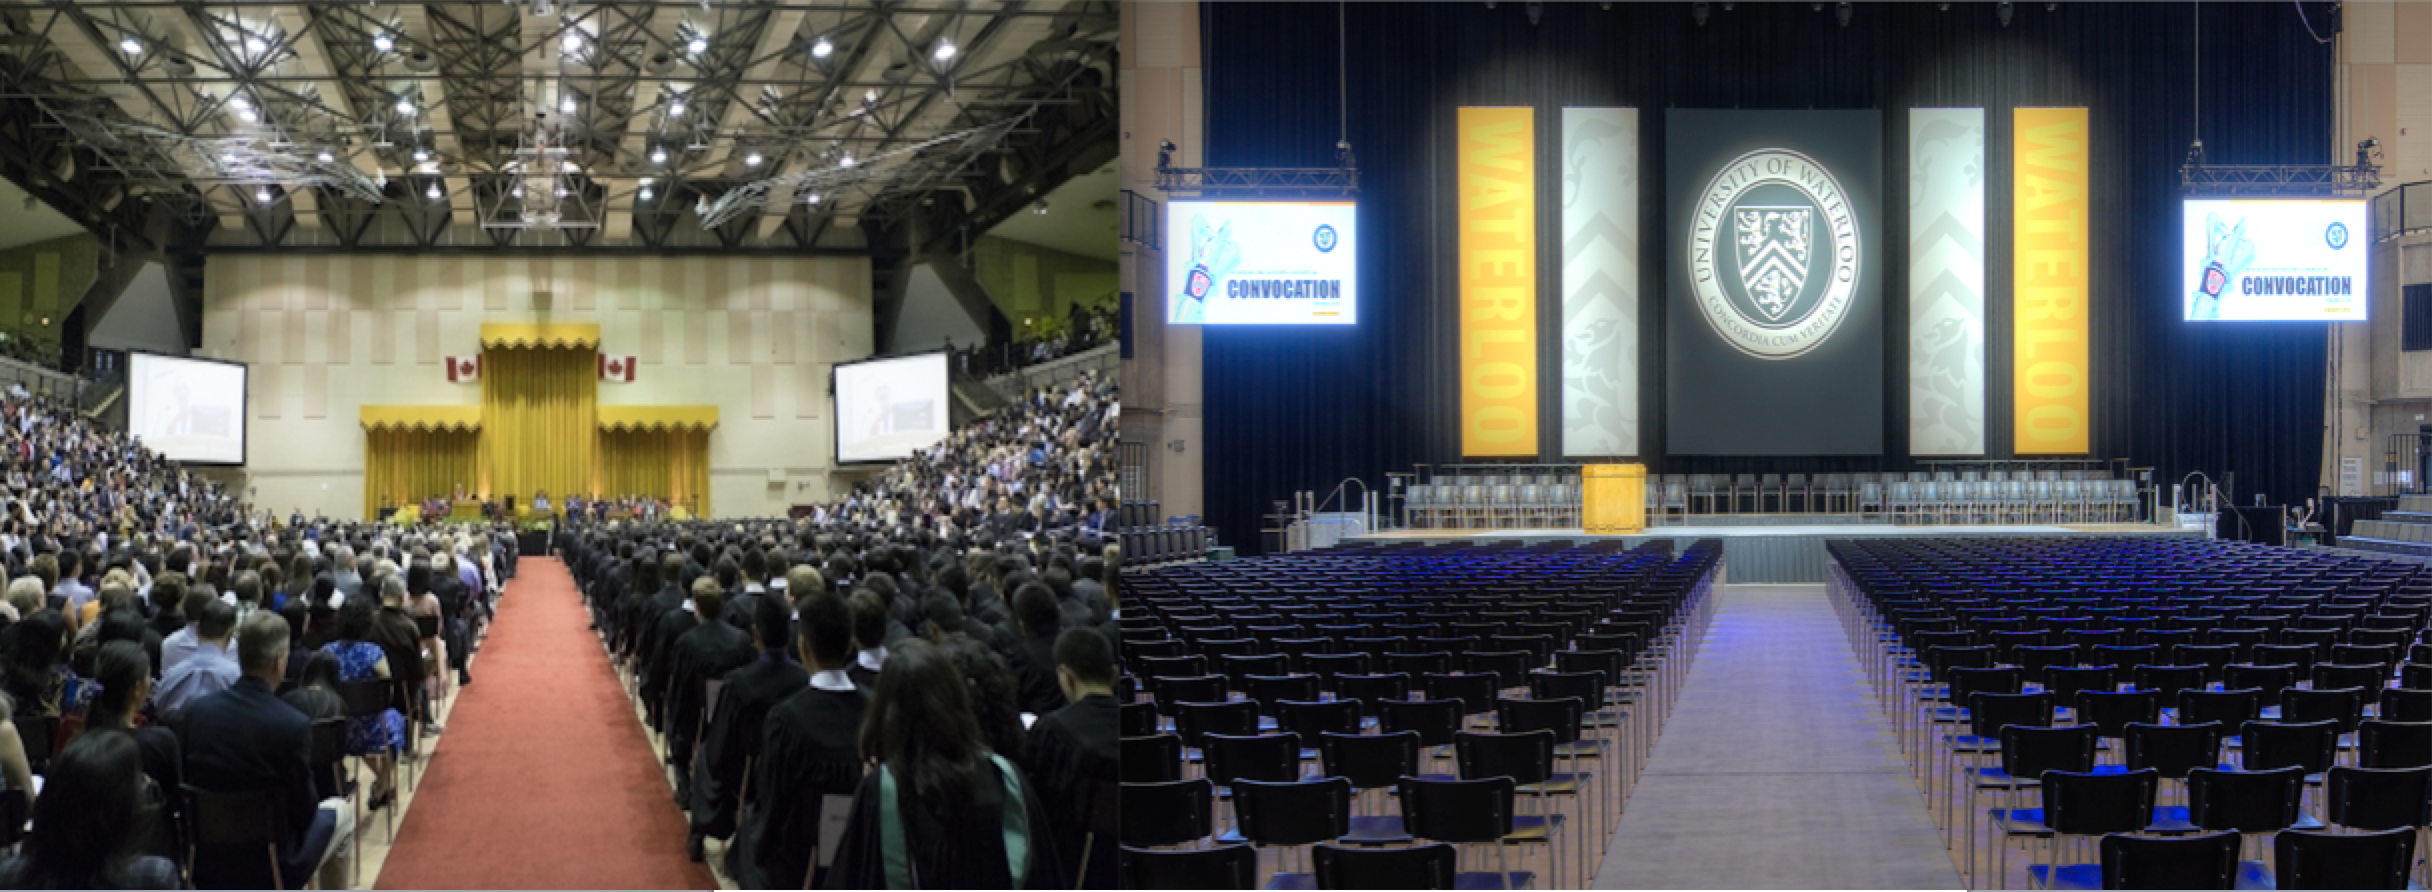 The old Convocation stage design contrasted with the new Convocation stage design in the Physical Activities Complex.